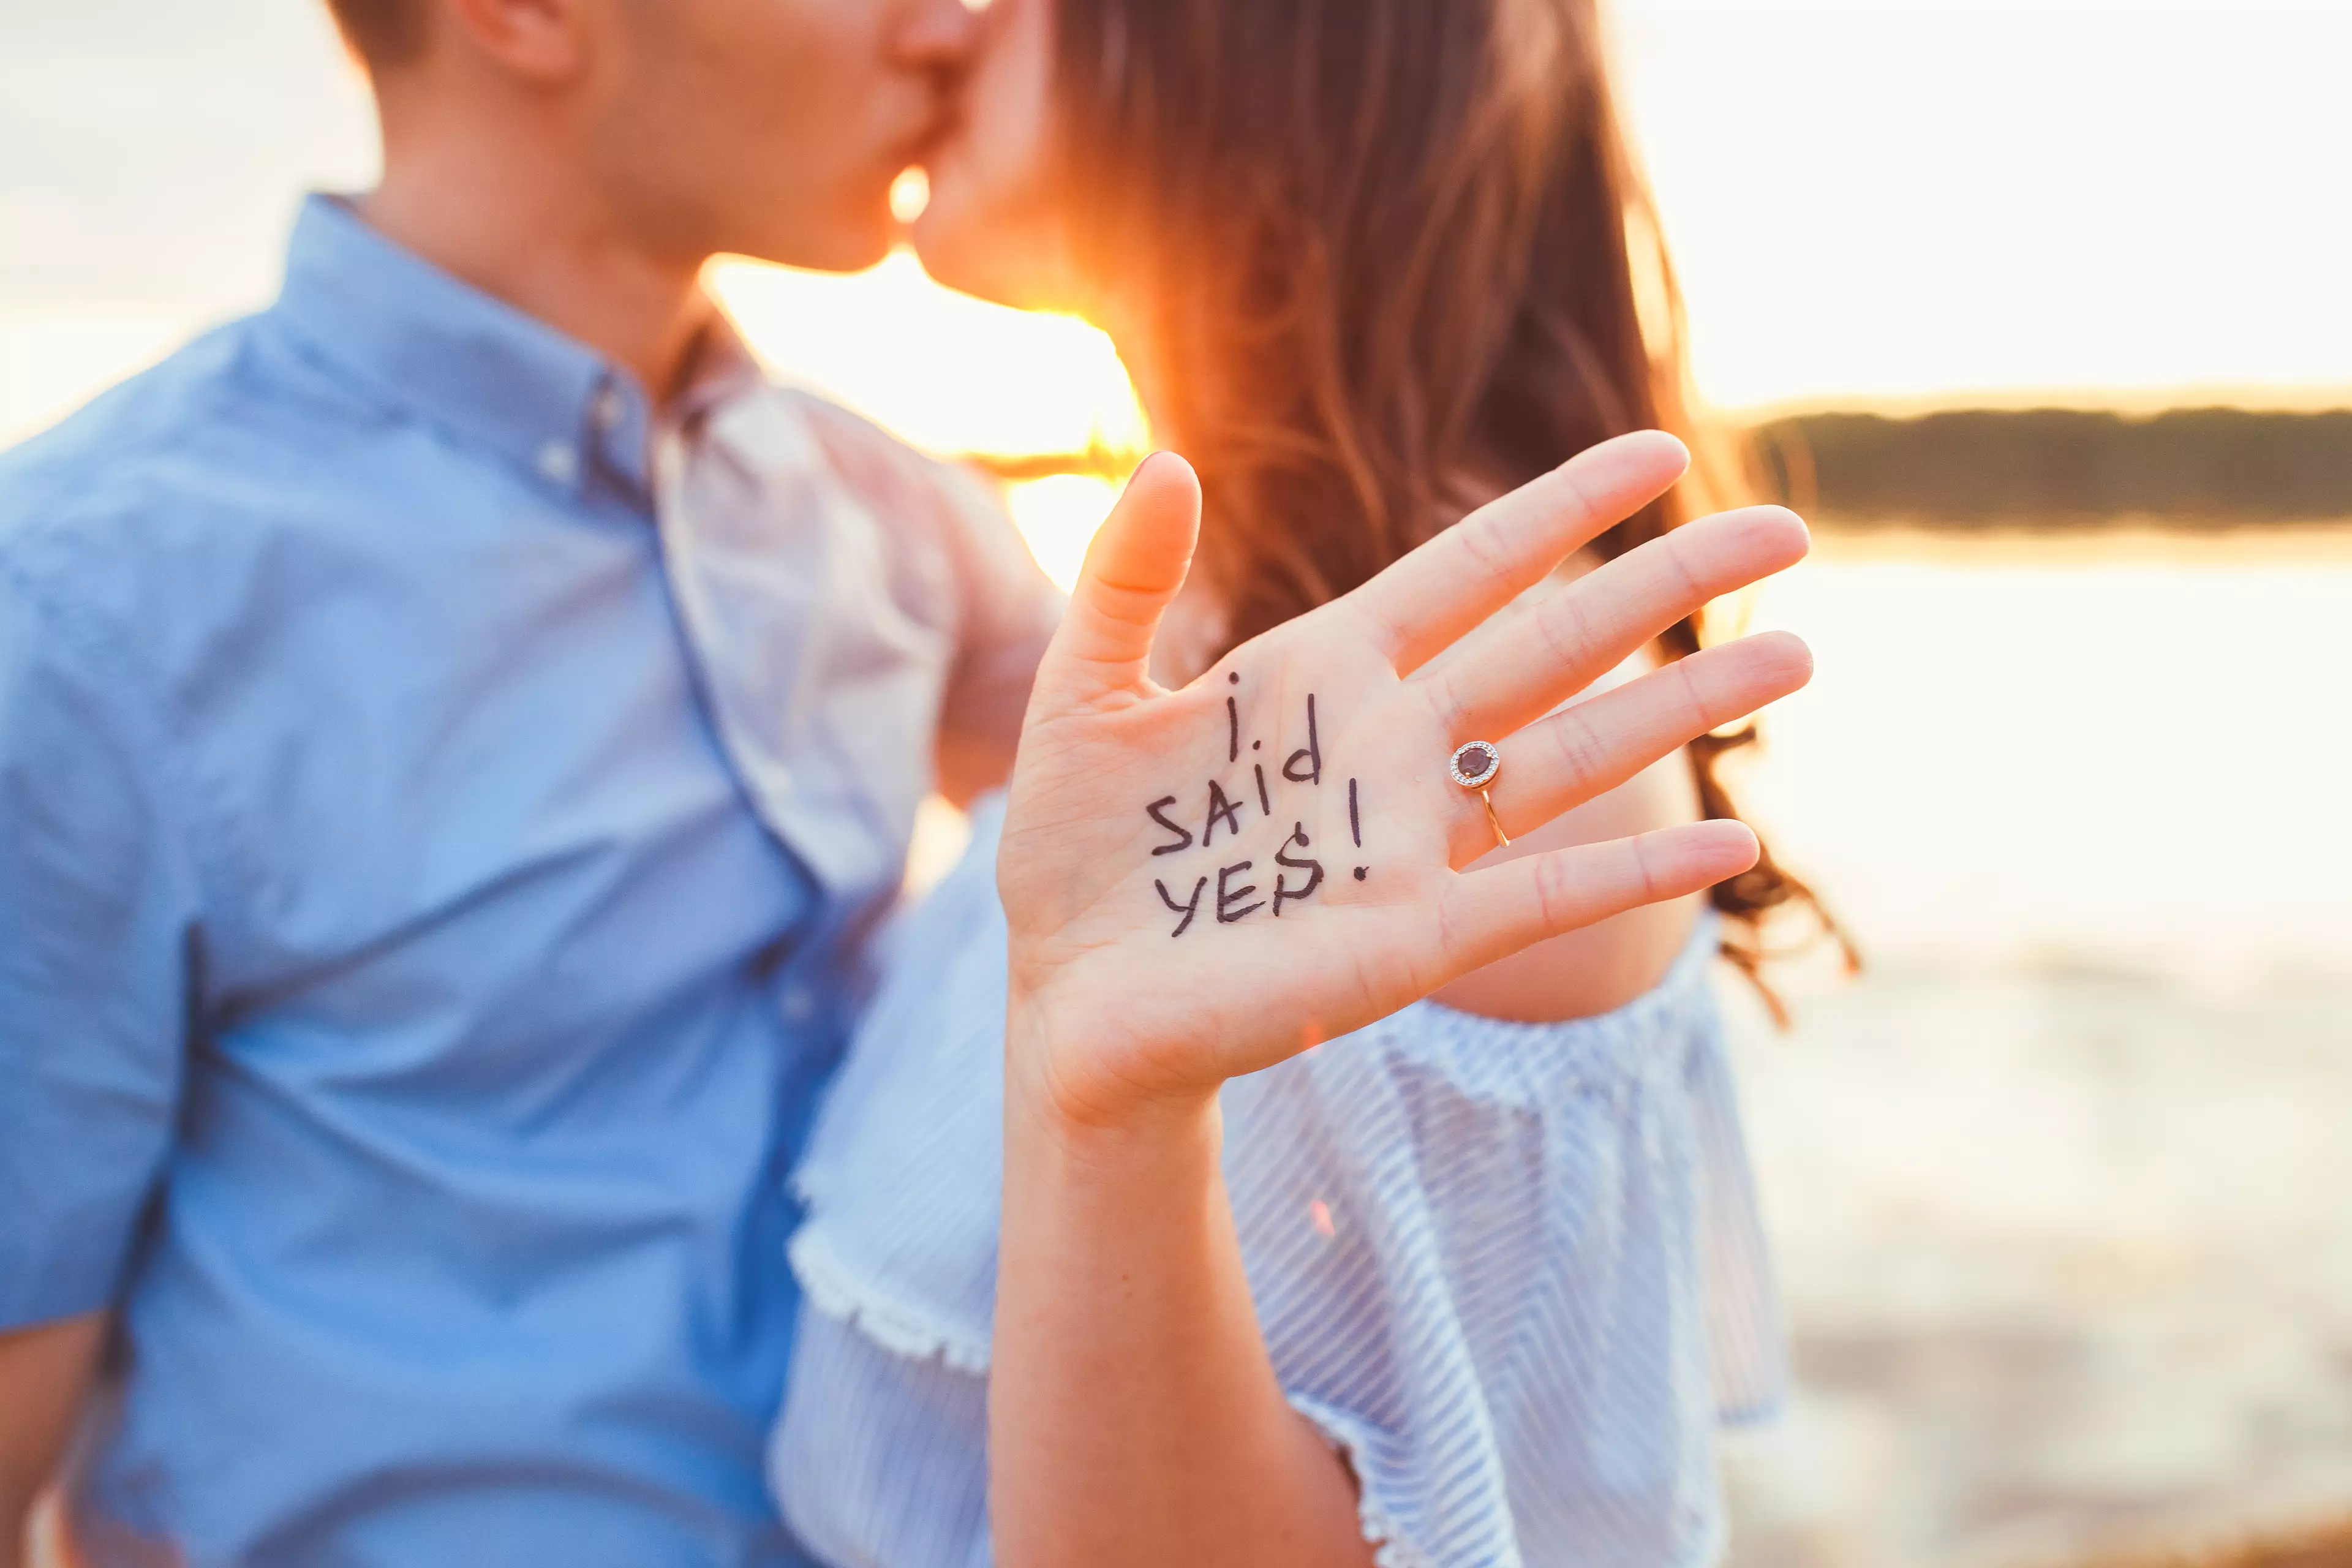 First comes the proposal, then comes the obligatory Instagram post (